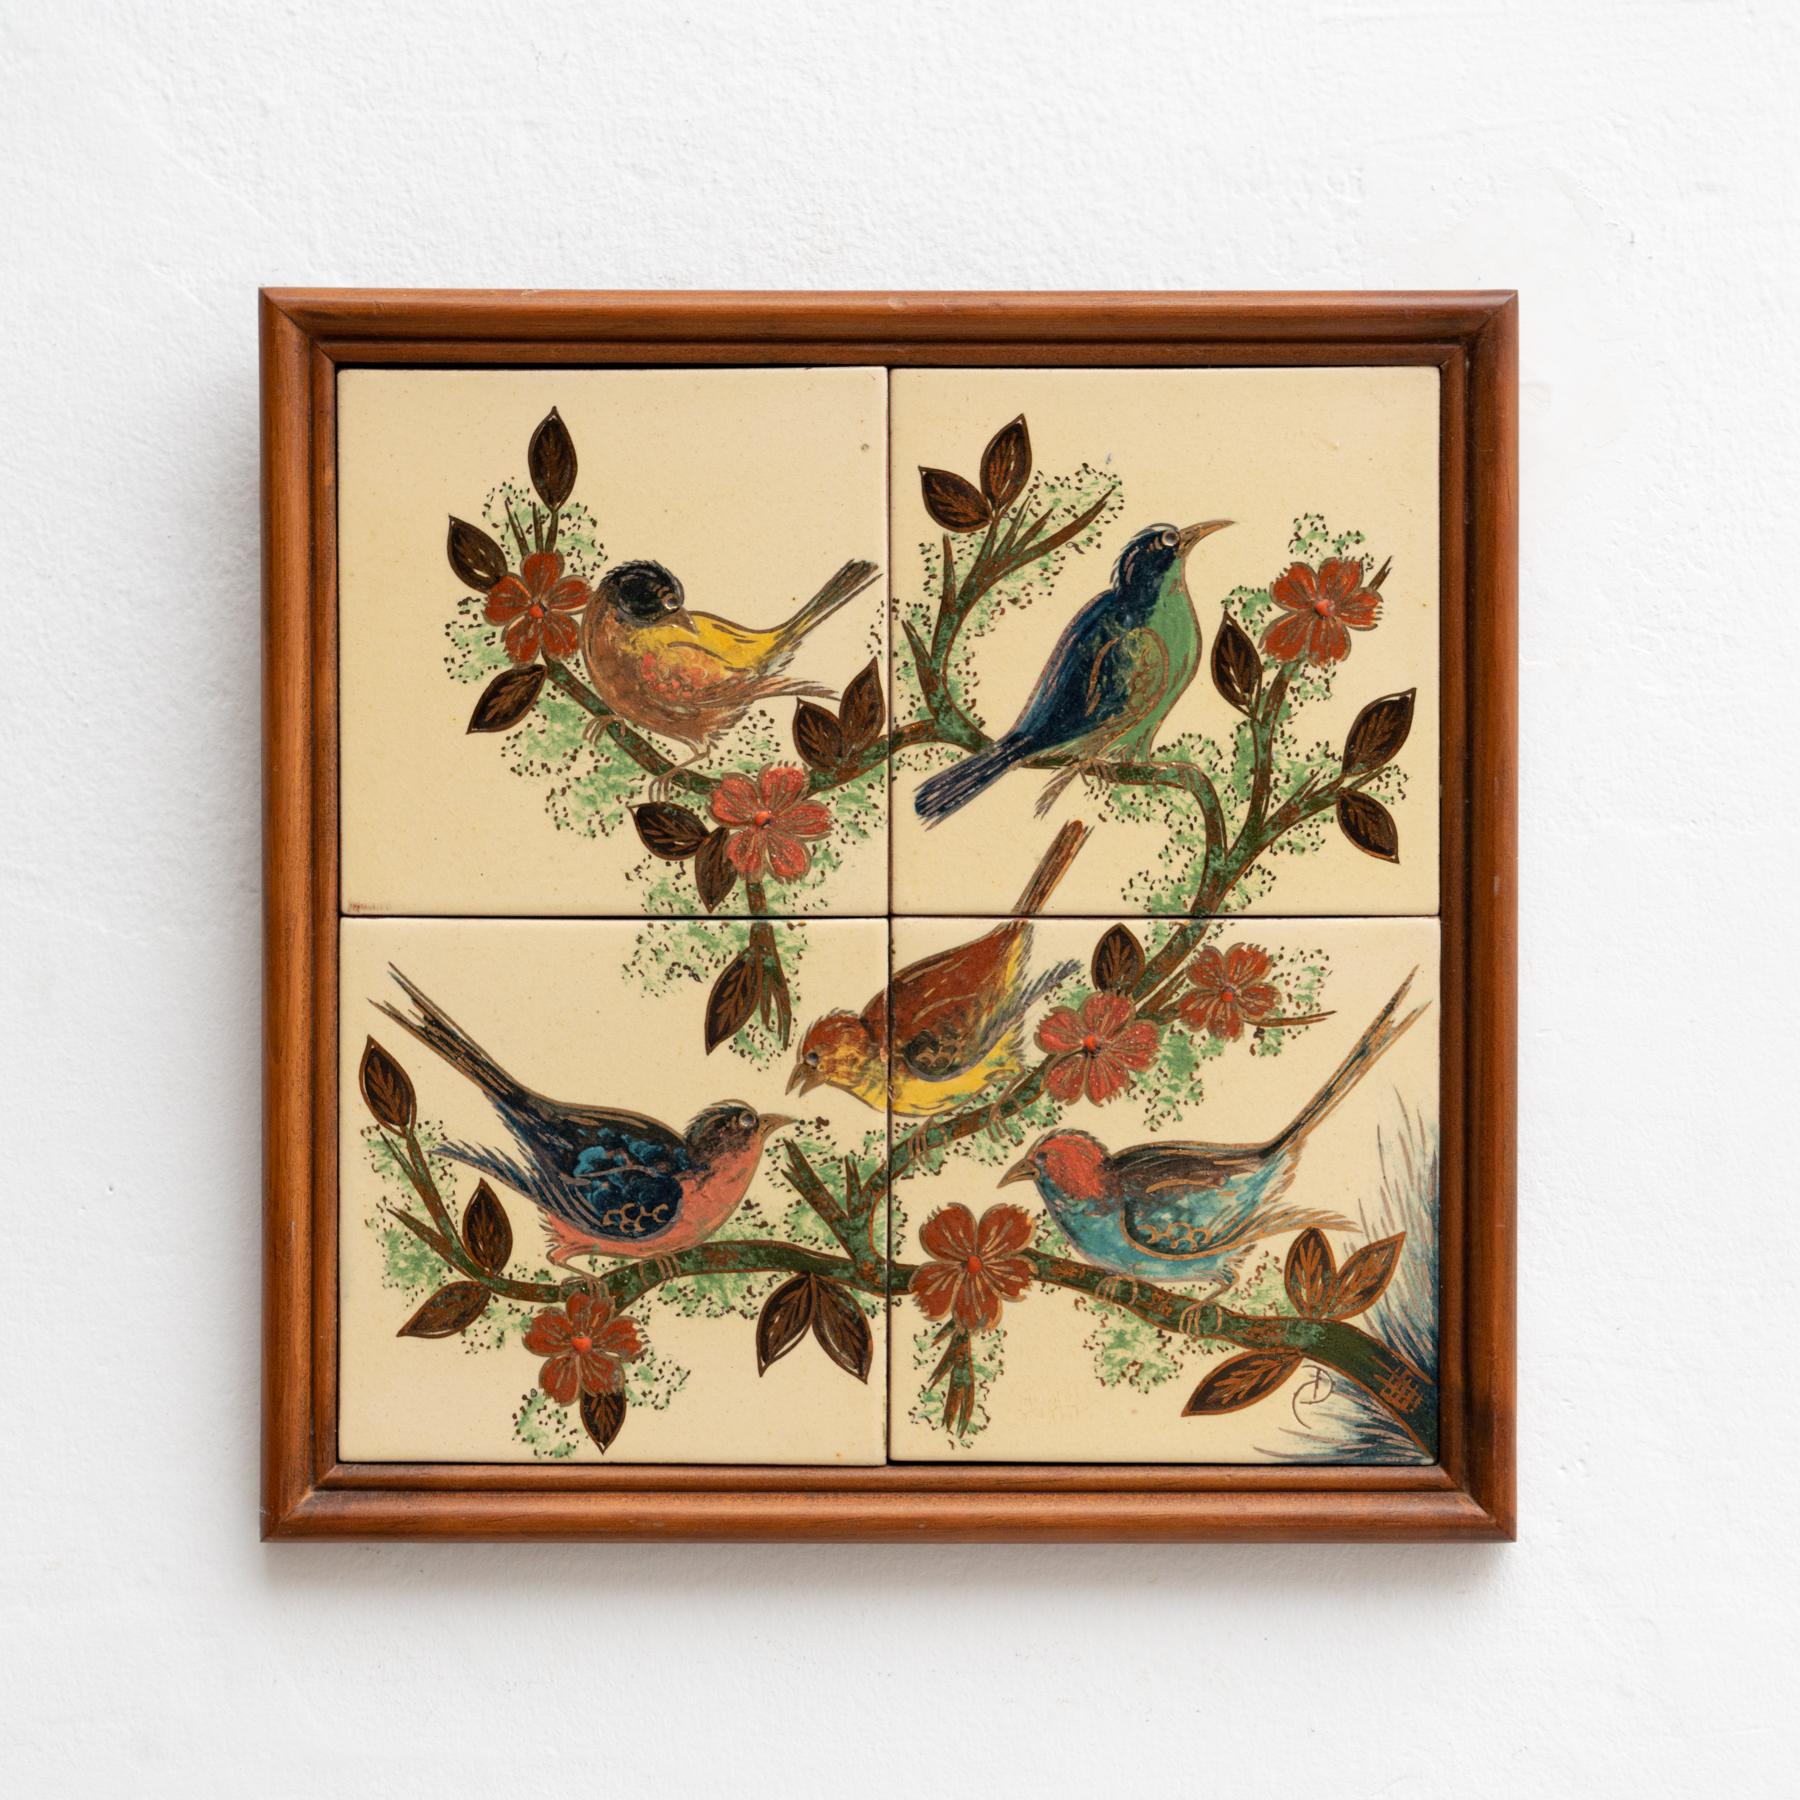 Ceramic hand painted artwork of five birds by Catalan artist Diaz Costa, circa 1960.
Framed. Signed.

In original condition, with minor wear consistent of age and use, preserving a beautiul patina.